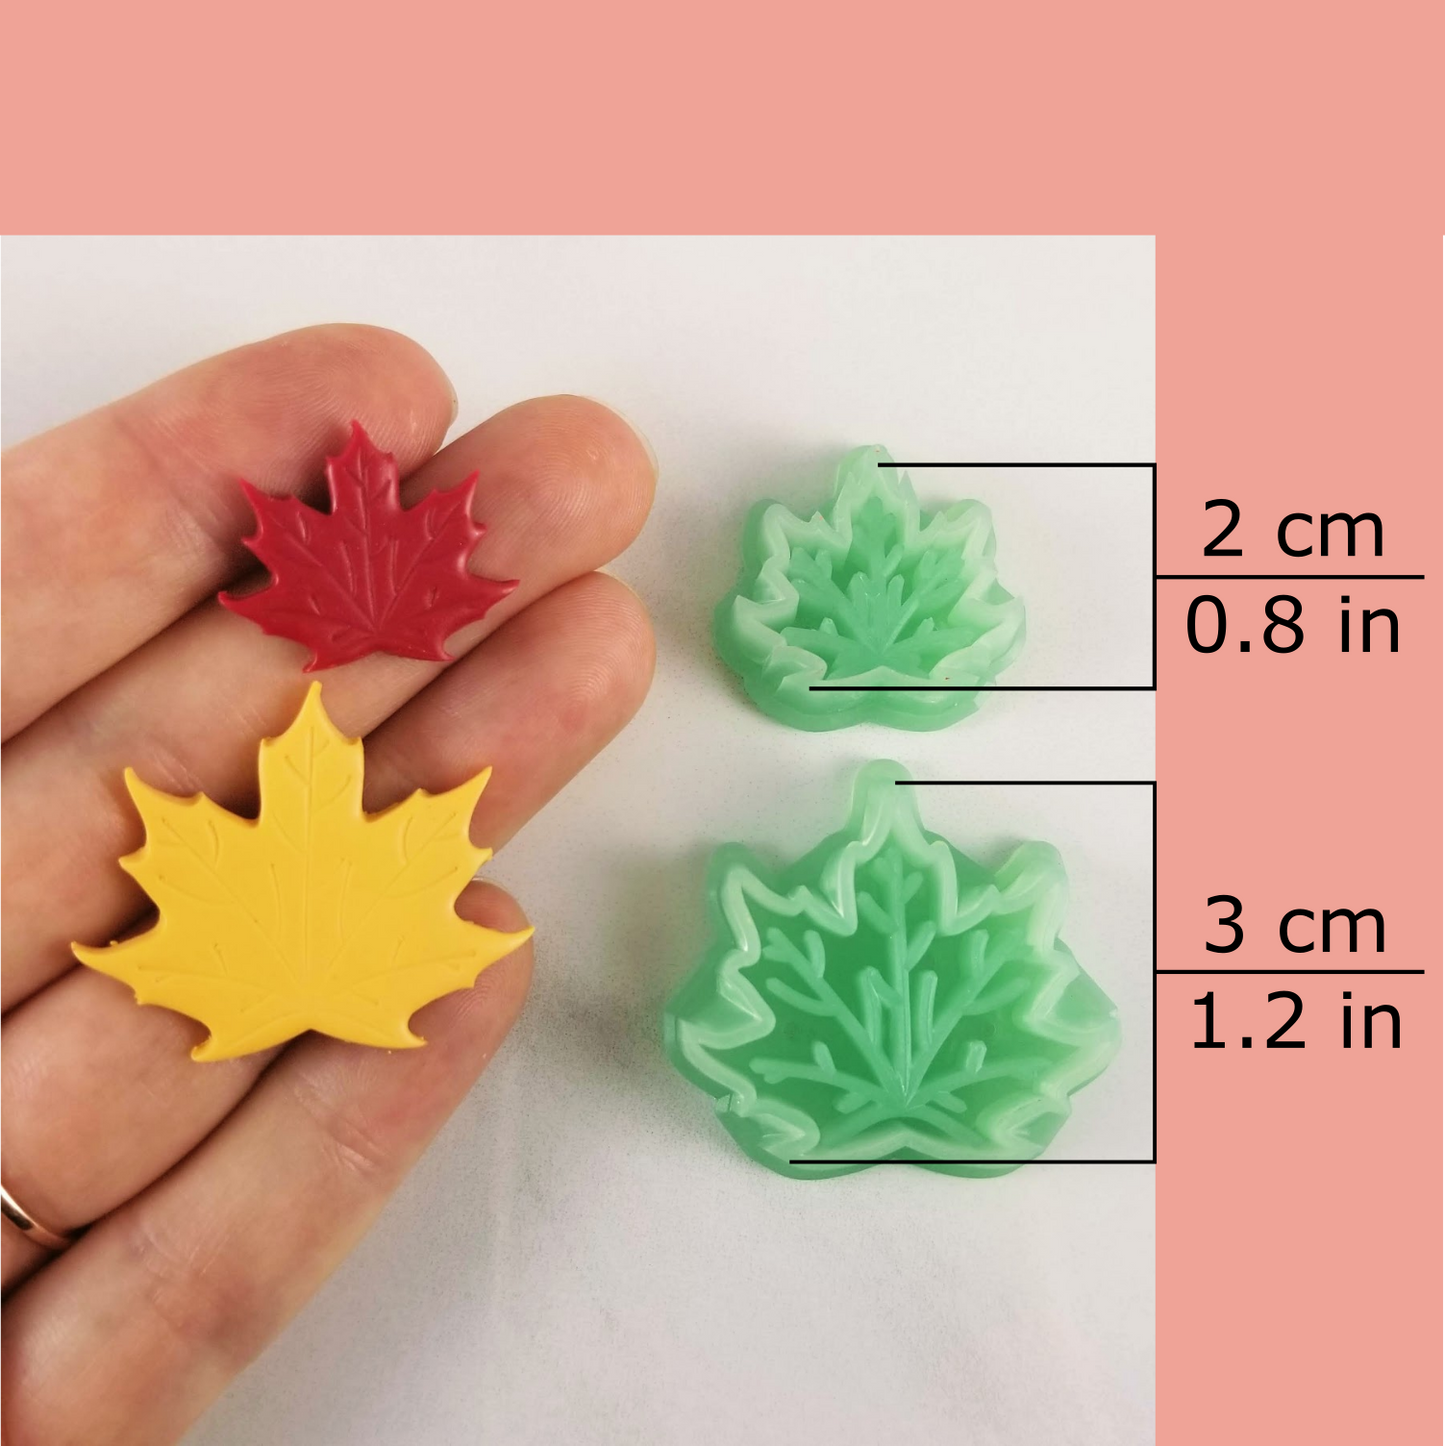 Small maple leaf polymer clay cutters with dimensions shown. Great for stud earrings and small dangle earrings.